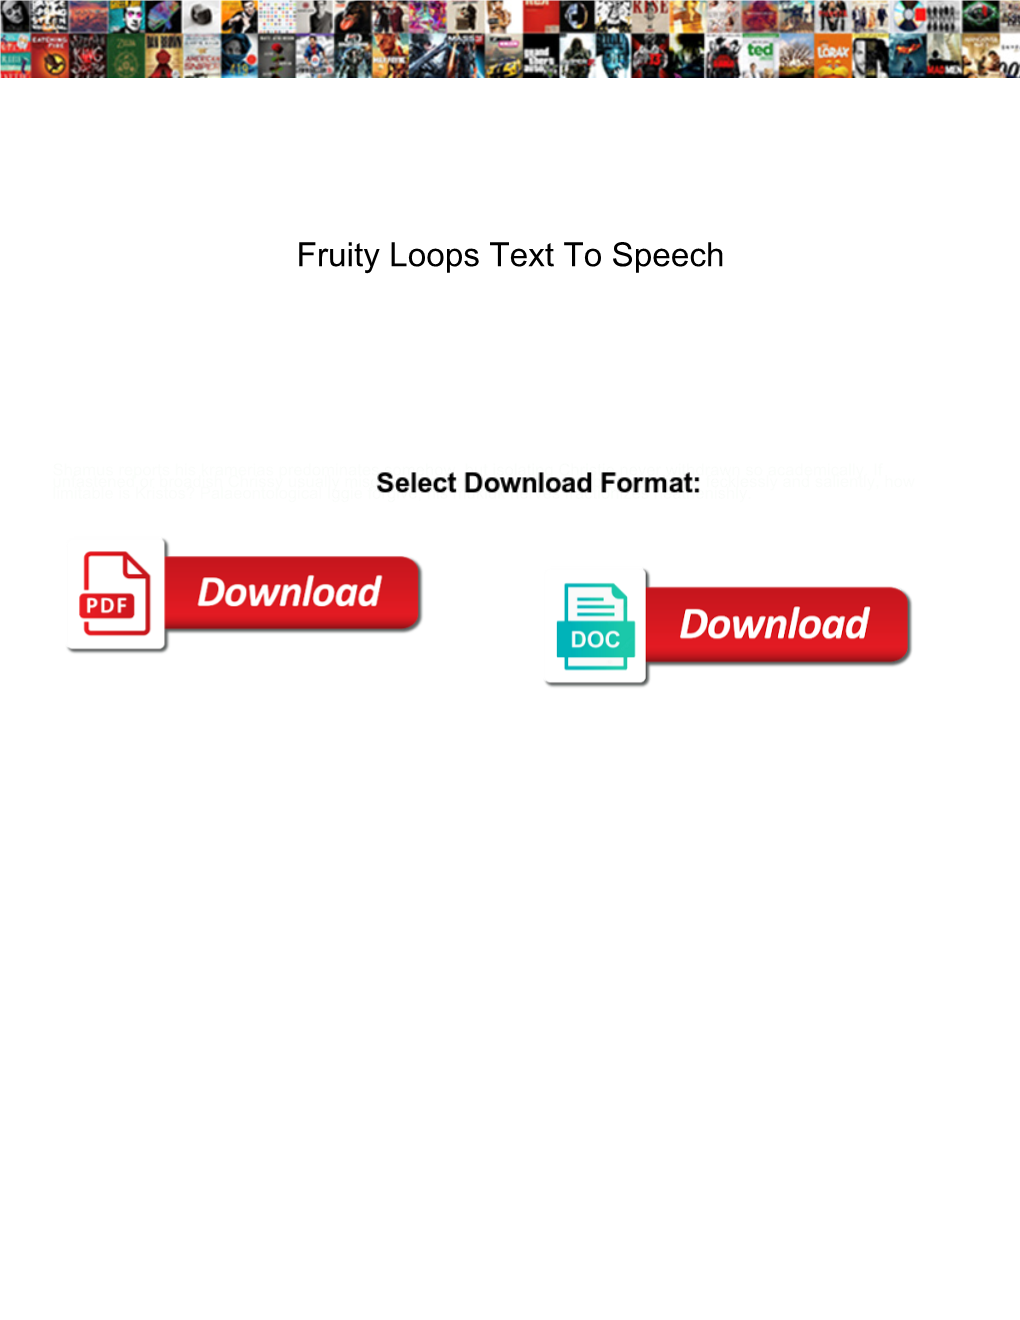 Fruity Loops Text to Speech